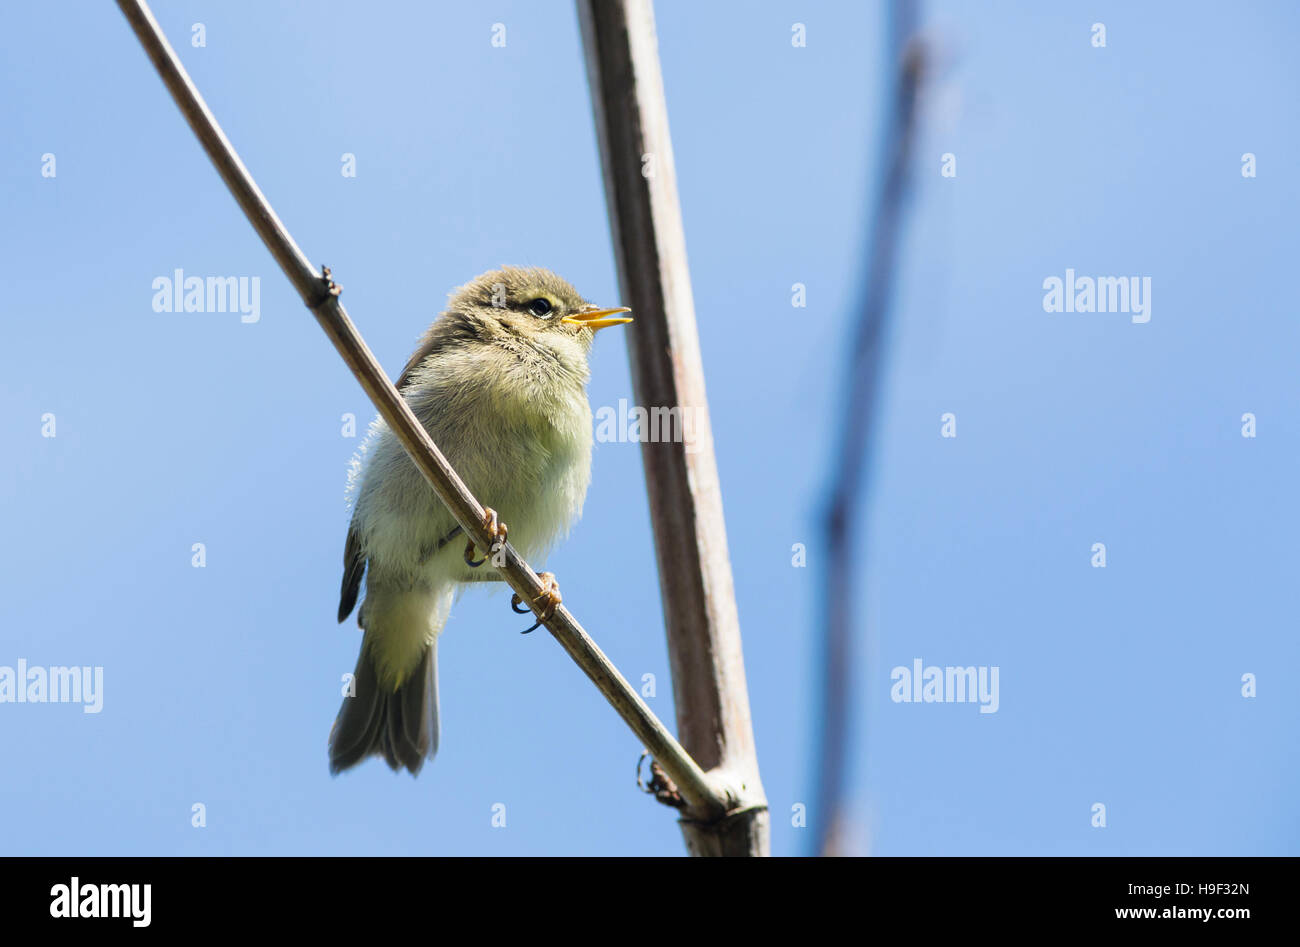 chaffinch fledgling perched on twig Stock Photo